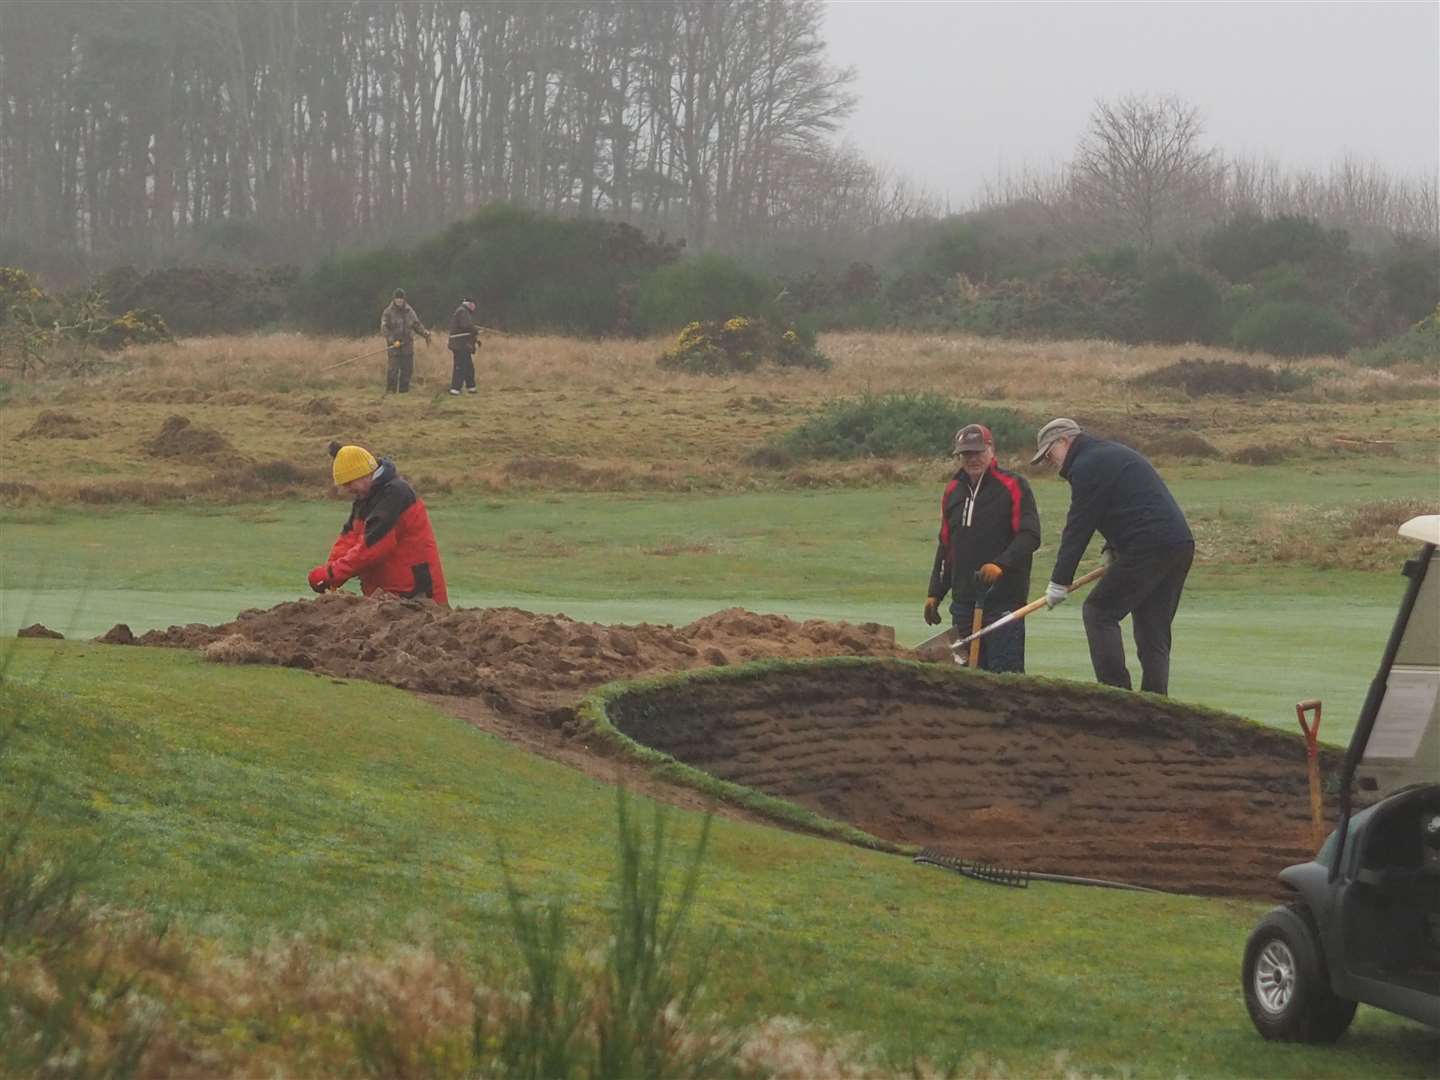 Modernisation of the course has involved moving bunkers to cope with changes in the ability of the average golfer. Photo: Alan Martin